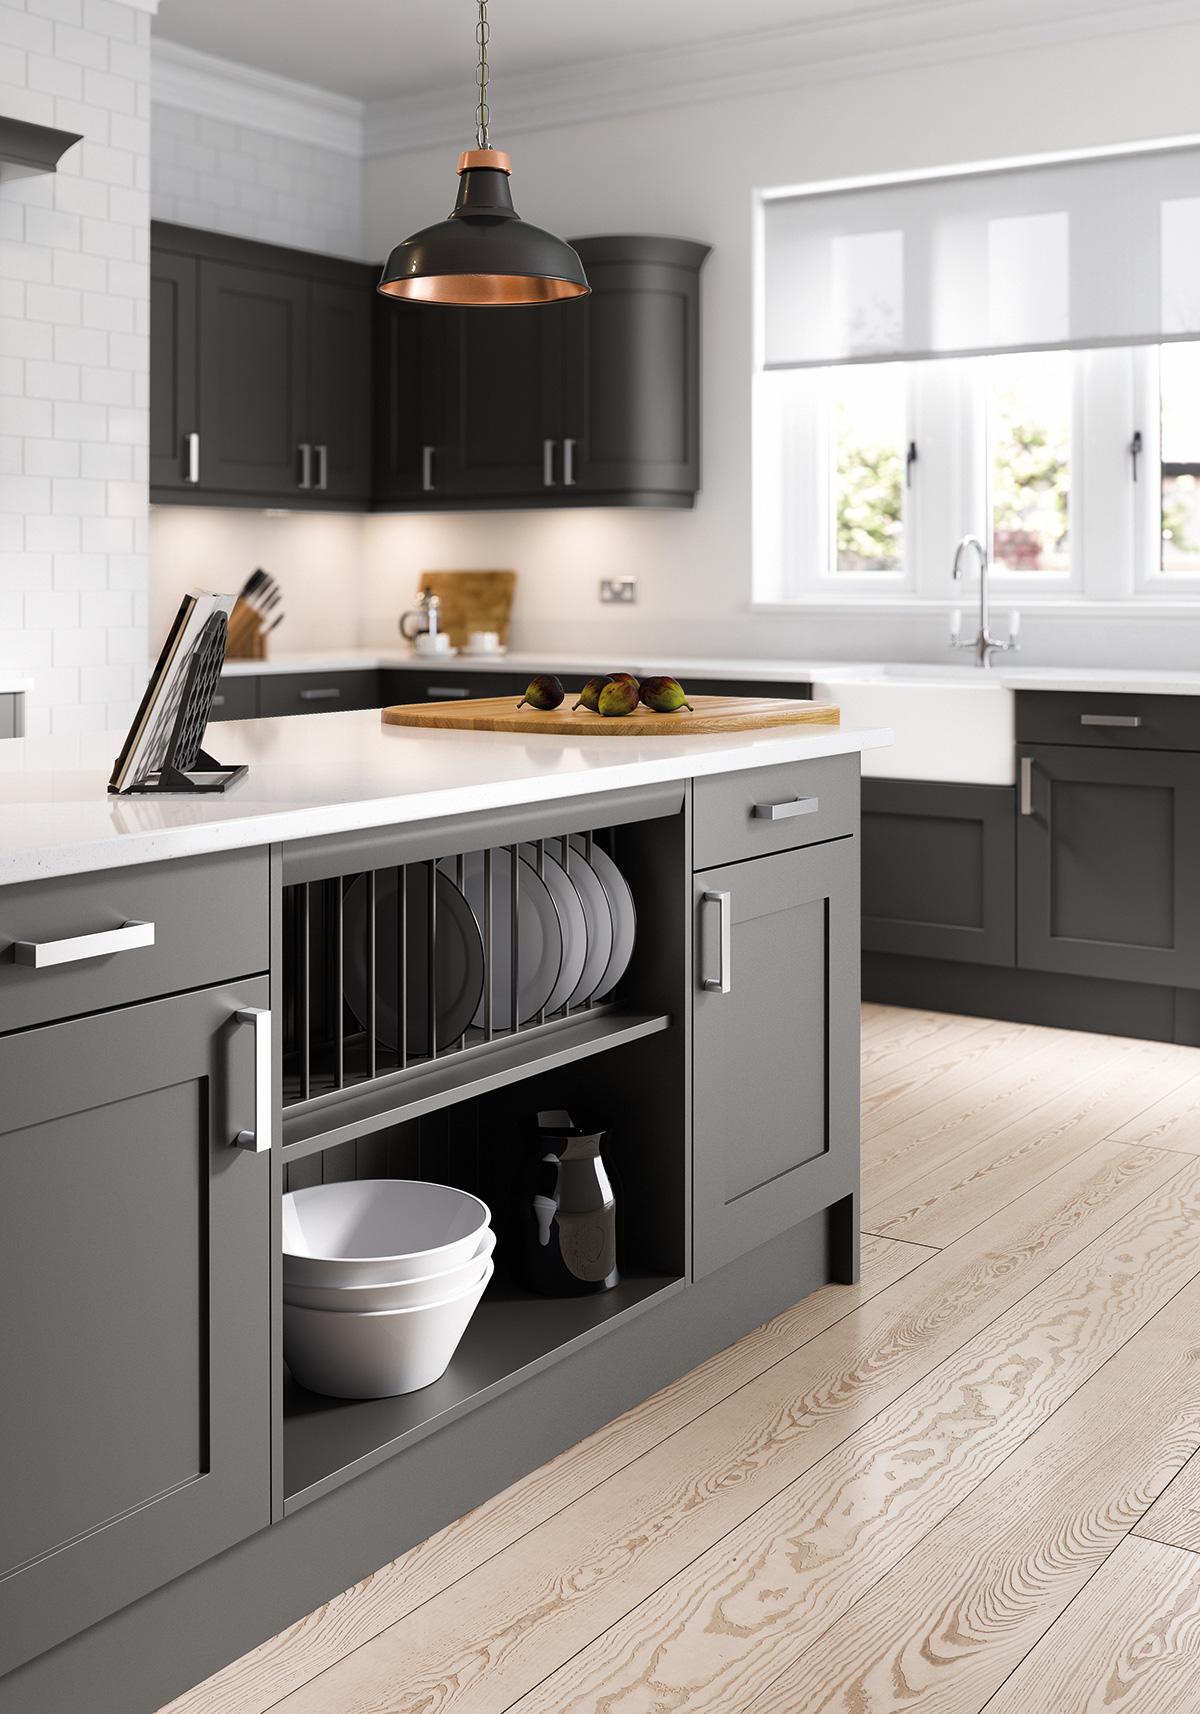 Oxford Shaker Anthracite - Shaker Style Kitchen Cabinet Doors